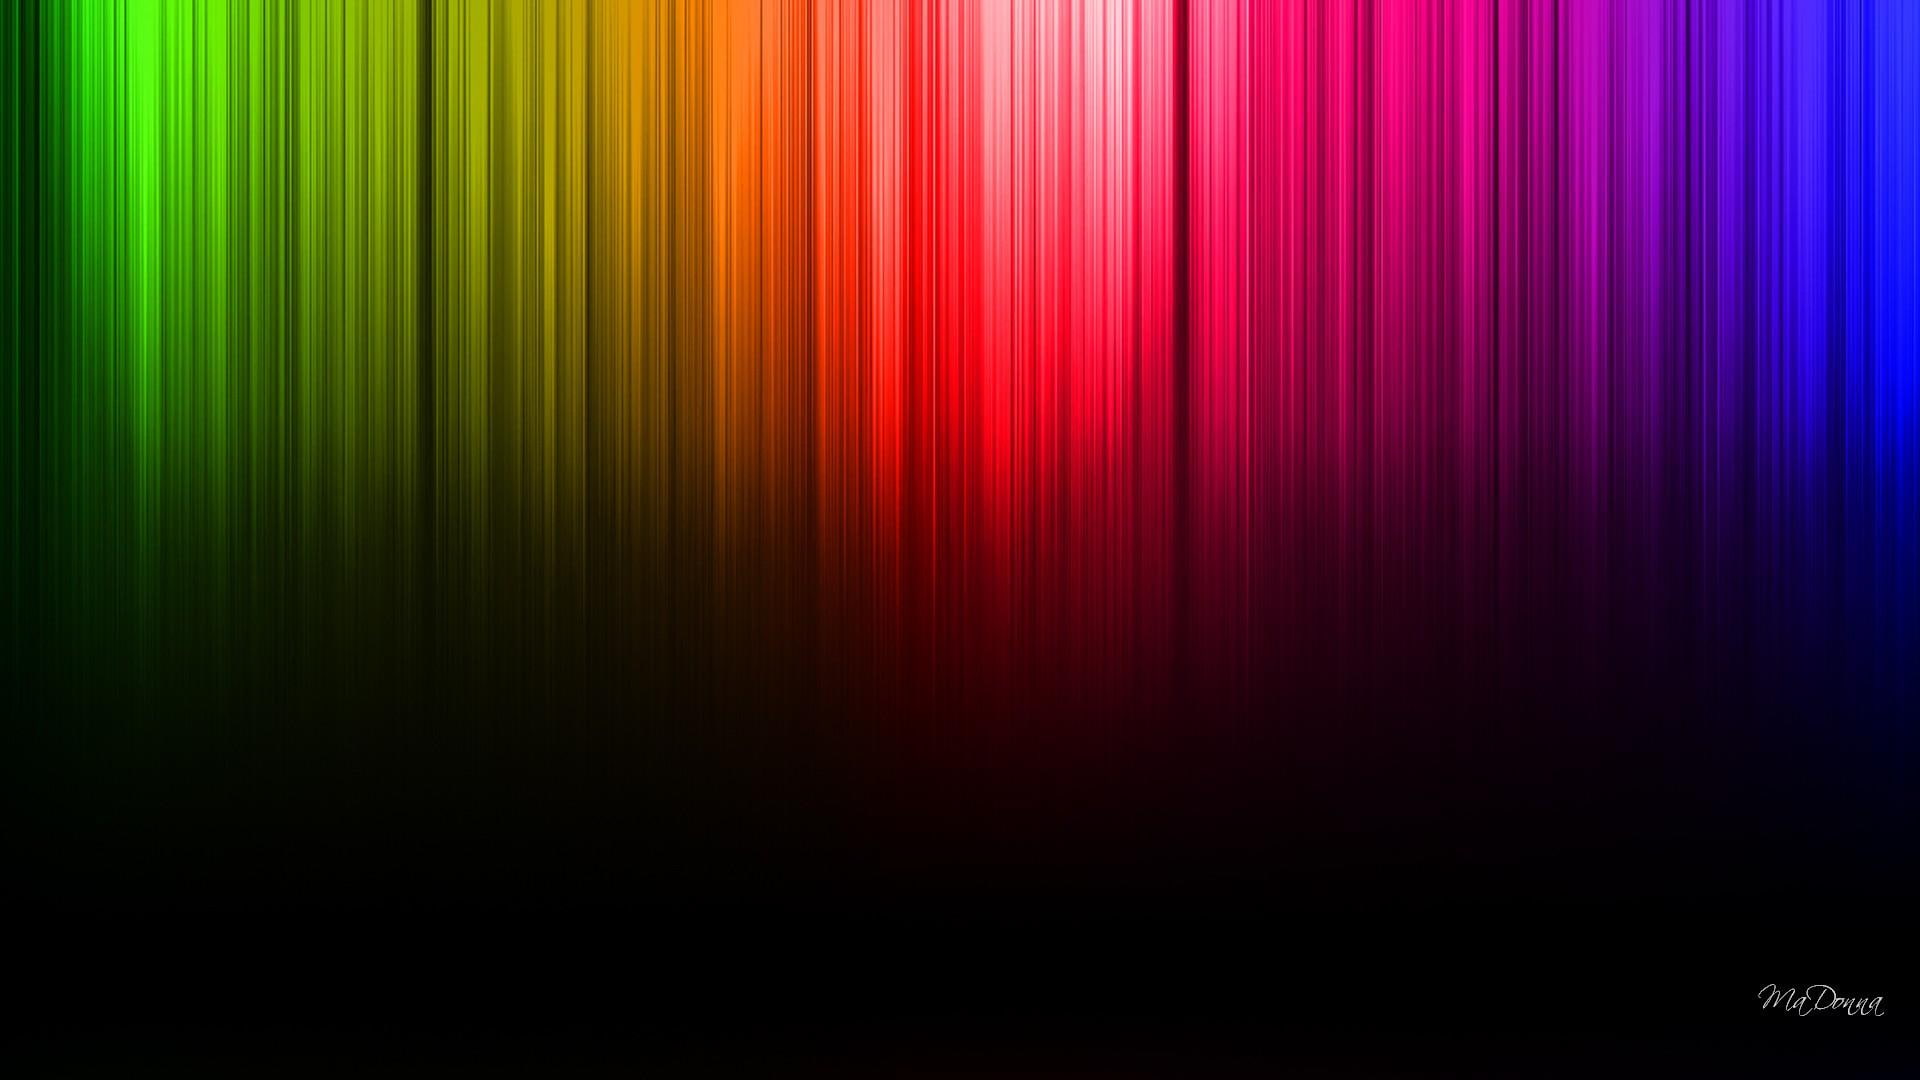 Another Spectrum, colorful, bright, light, dark, colors, 3d and abstract